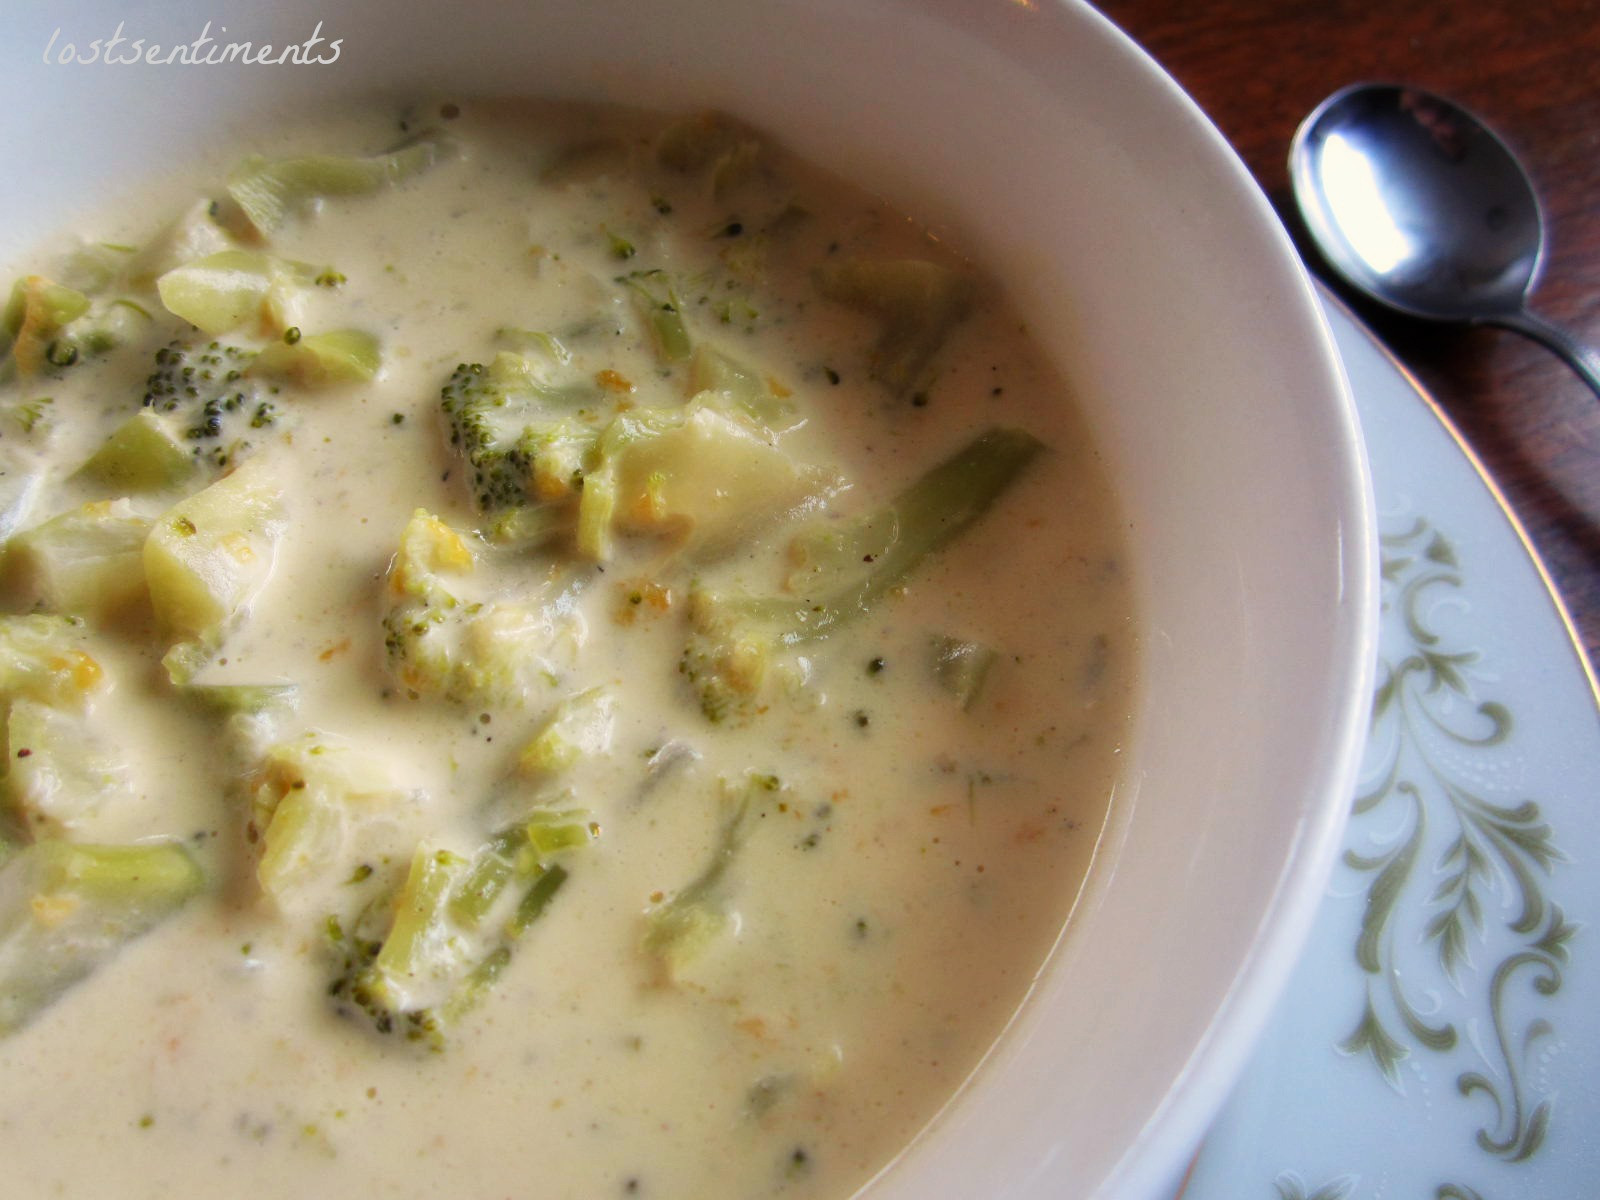 Low Carb Broccoli Cheddar Soup
 lostsentiments Low Carb Broccoli Cheese Soup for the